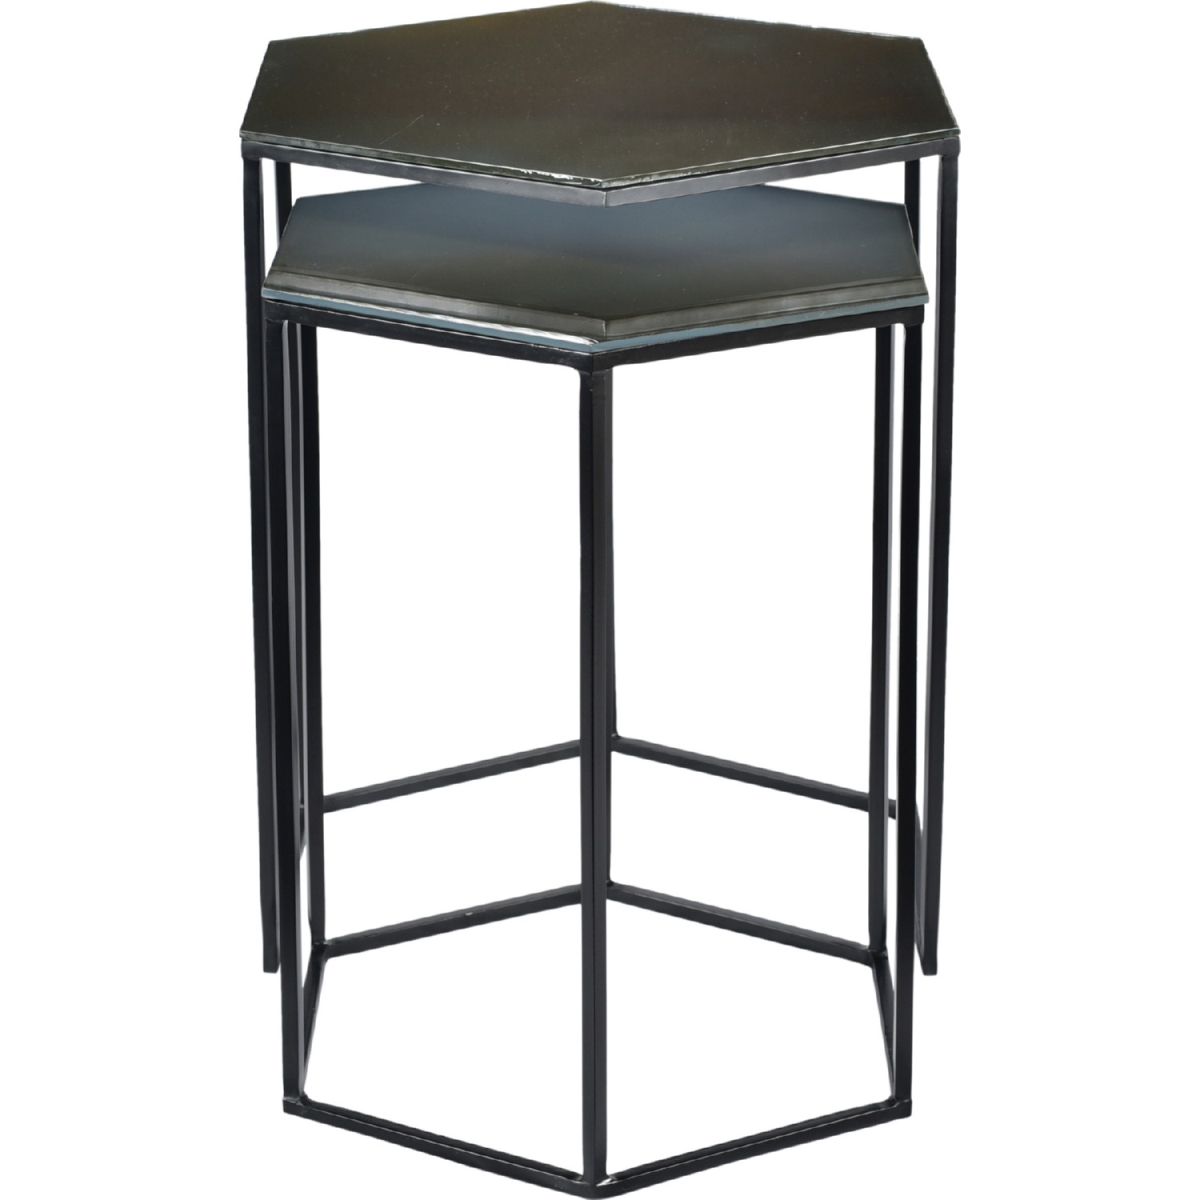 Gz-1008-02 Polygon Accent Tables - Black, 21 X 16 X 18.5 In. - Set Of 2